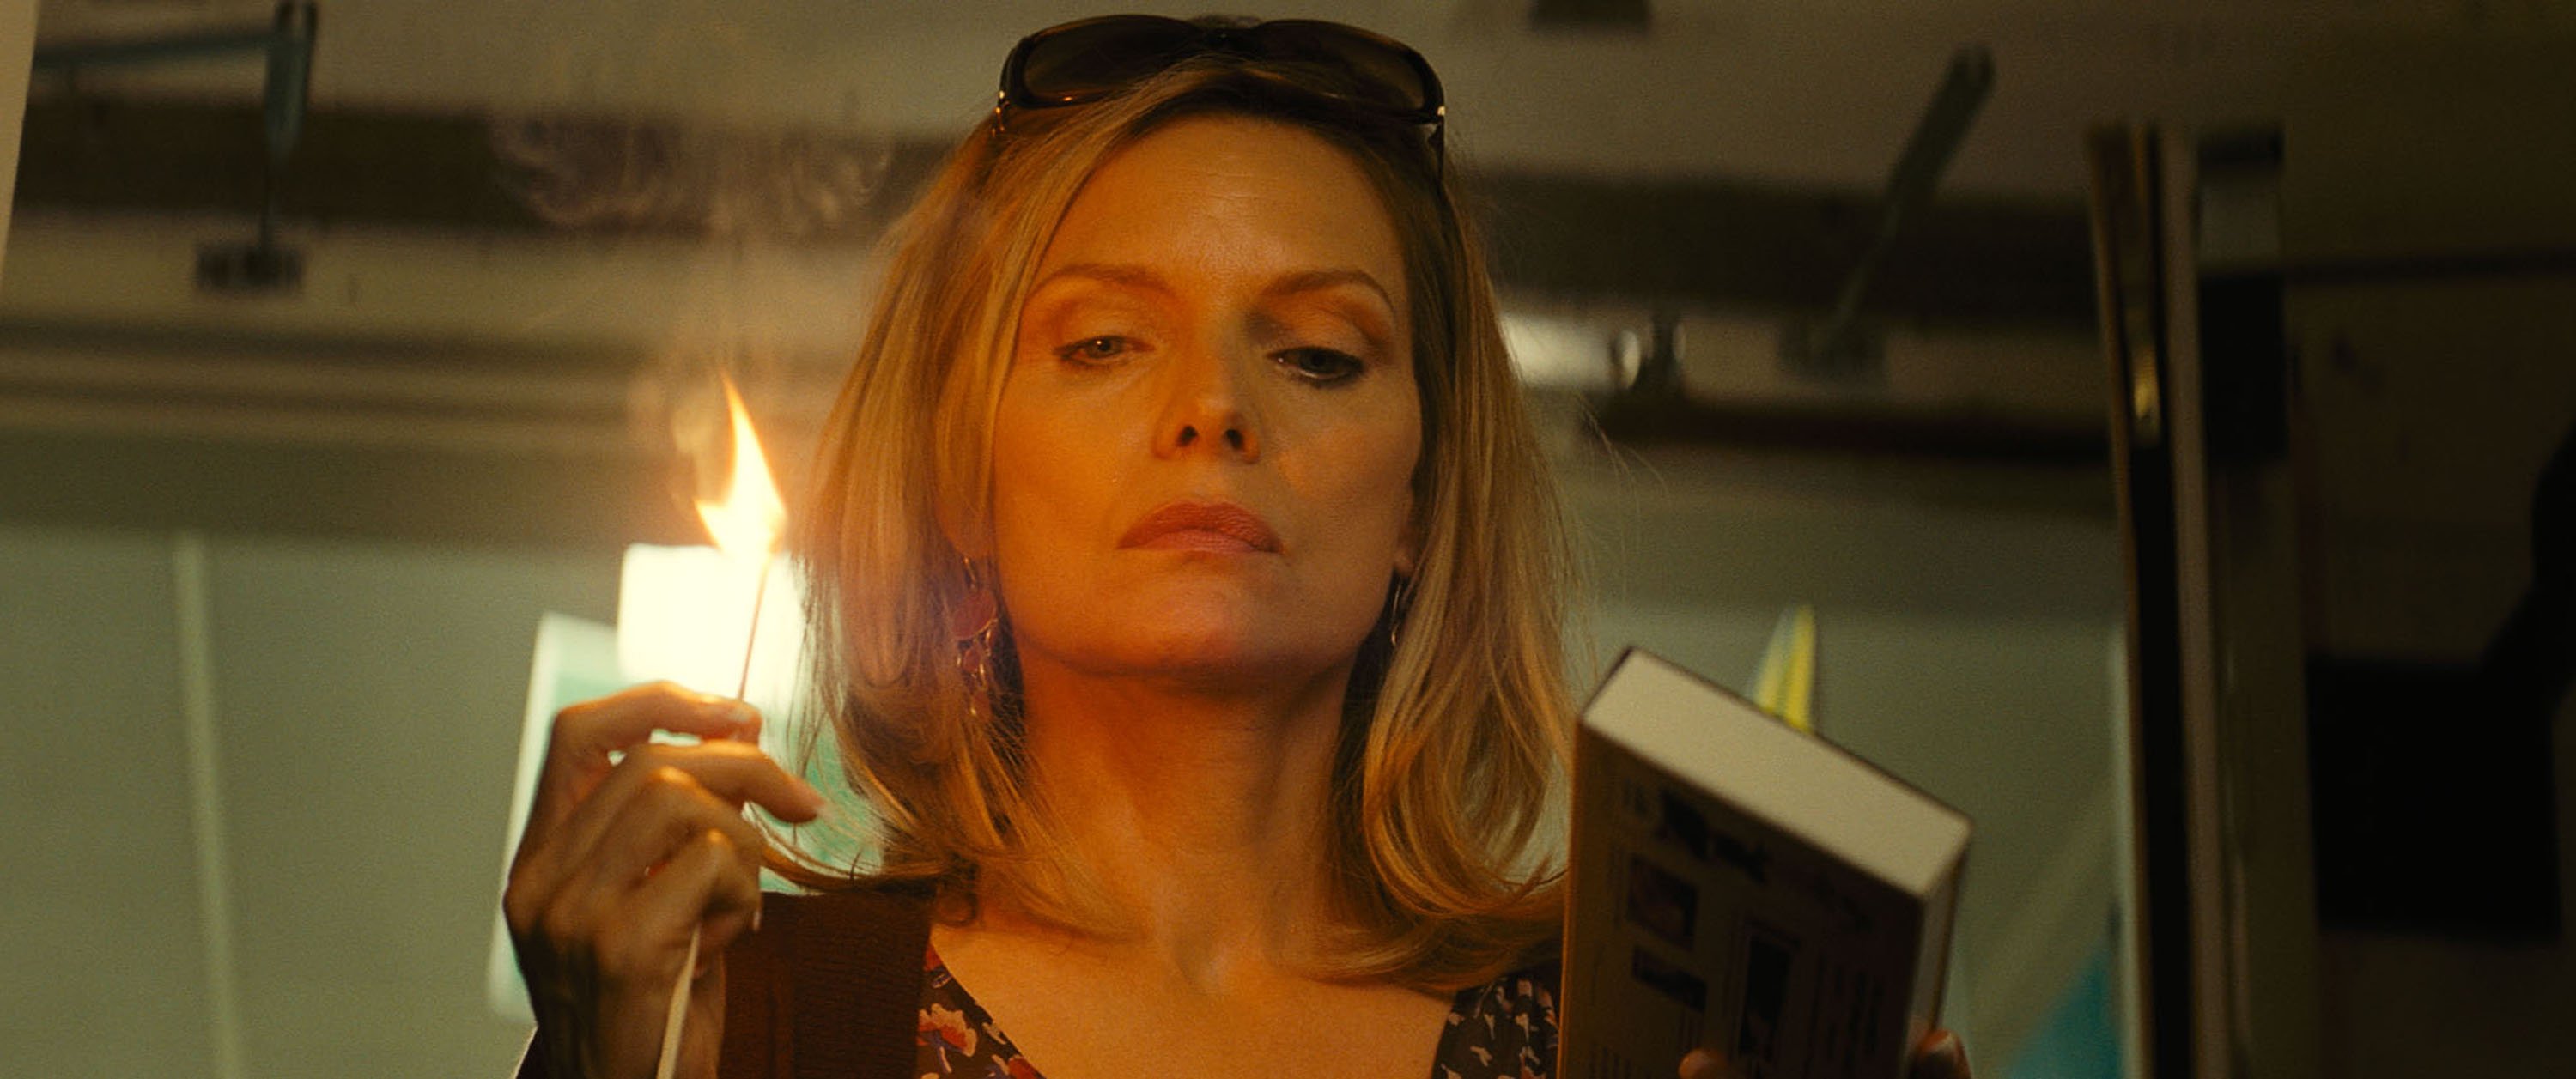 Michelle Pfeiffer in The Family